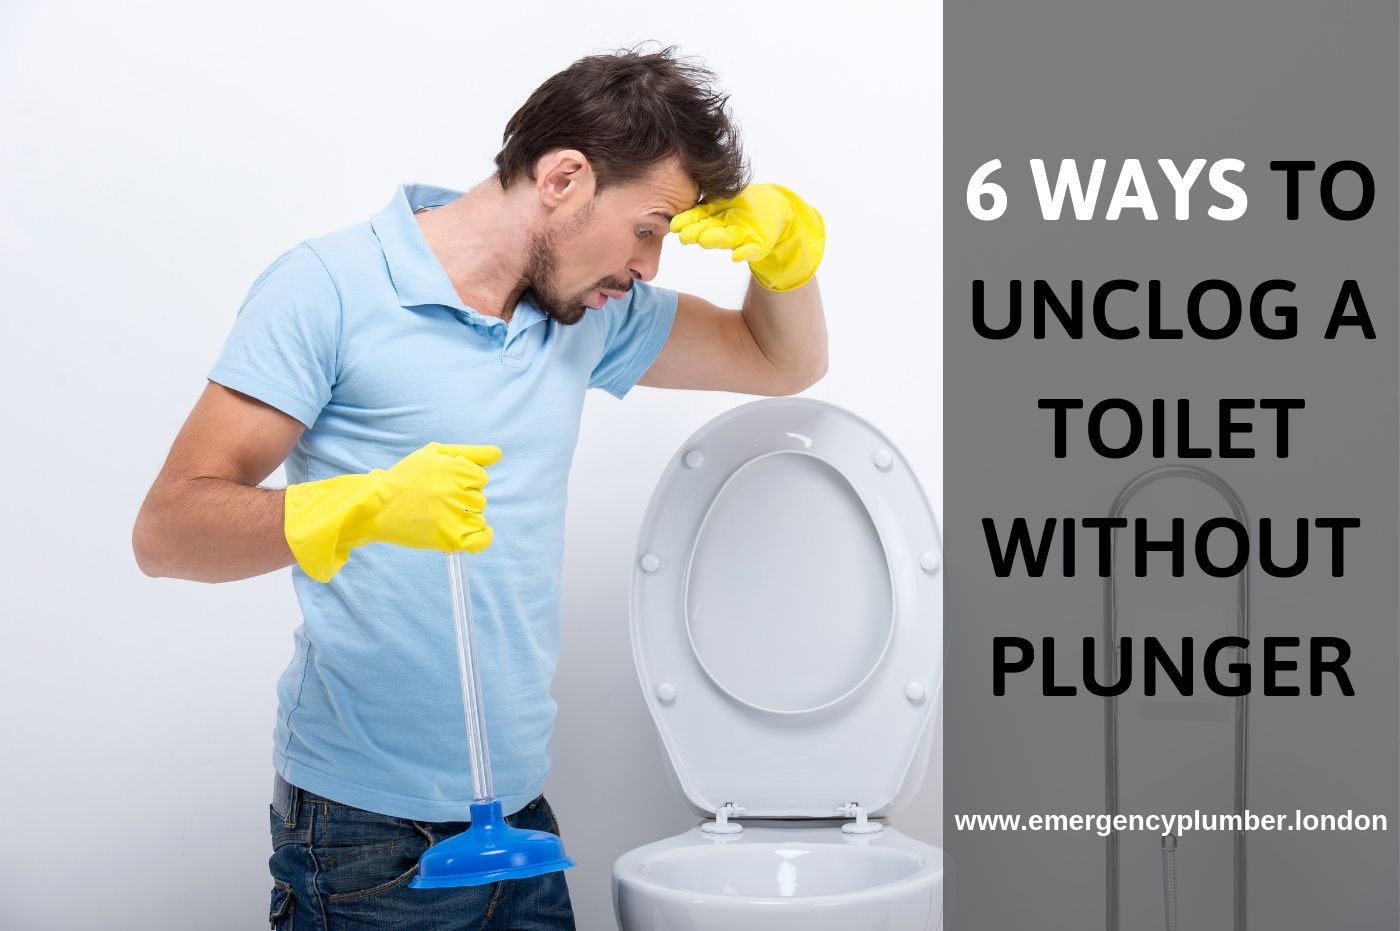 12 Ways to Unclog a Toilet Without a Plunger - Emergency Plumber London